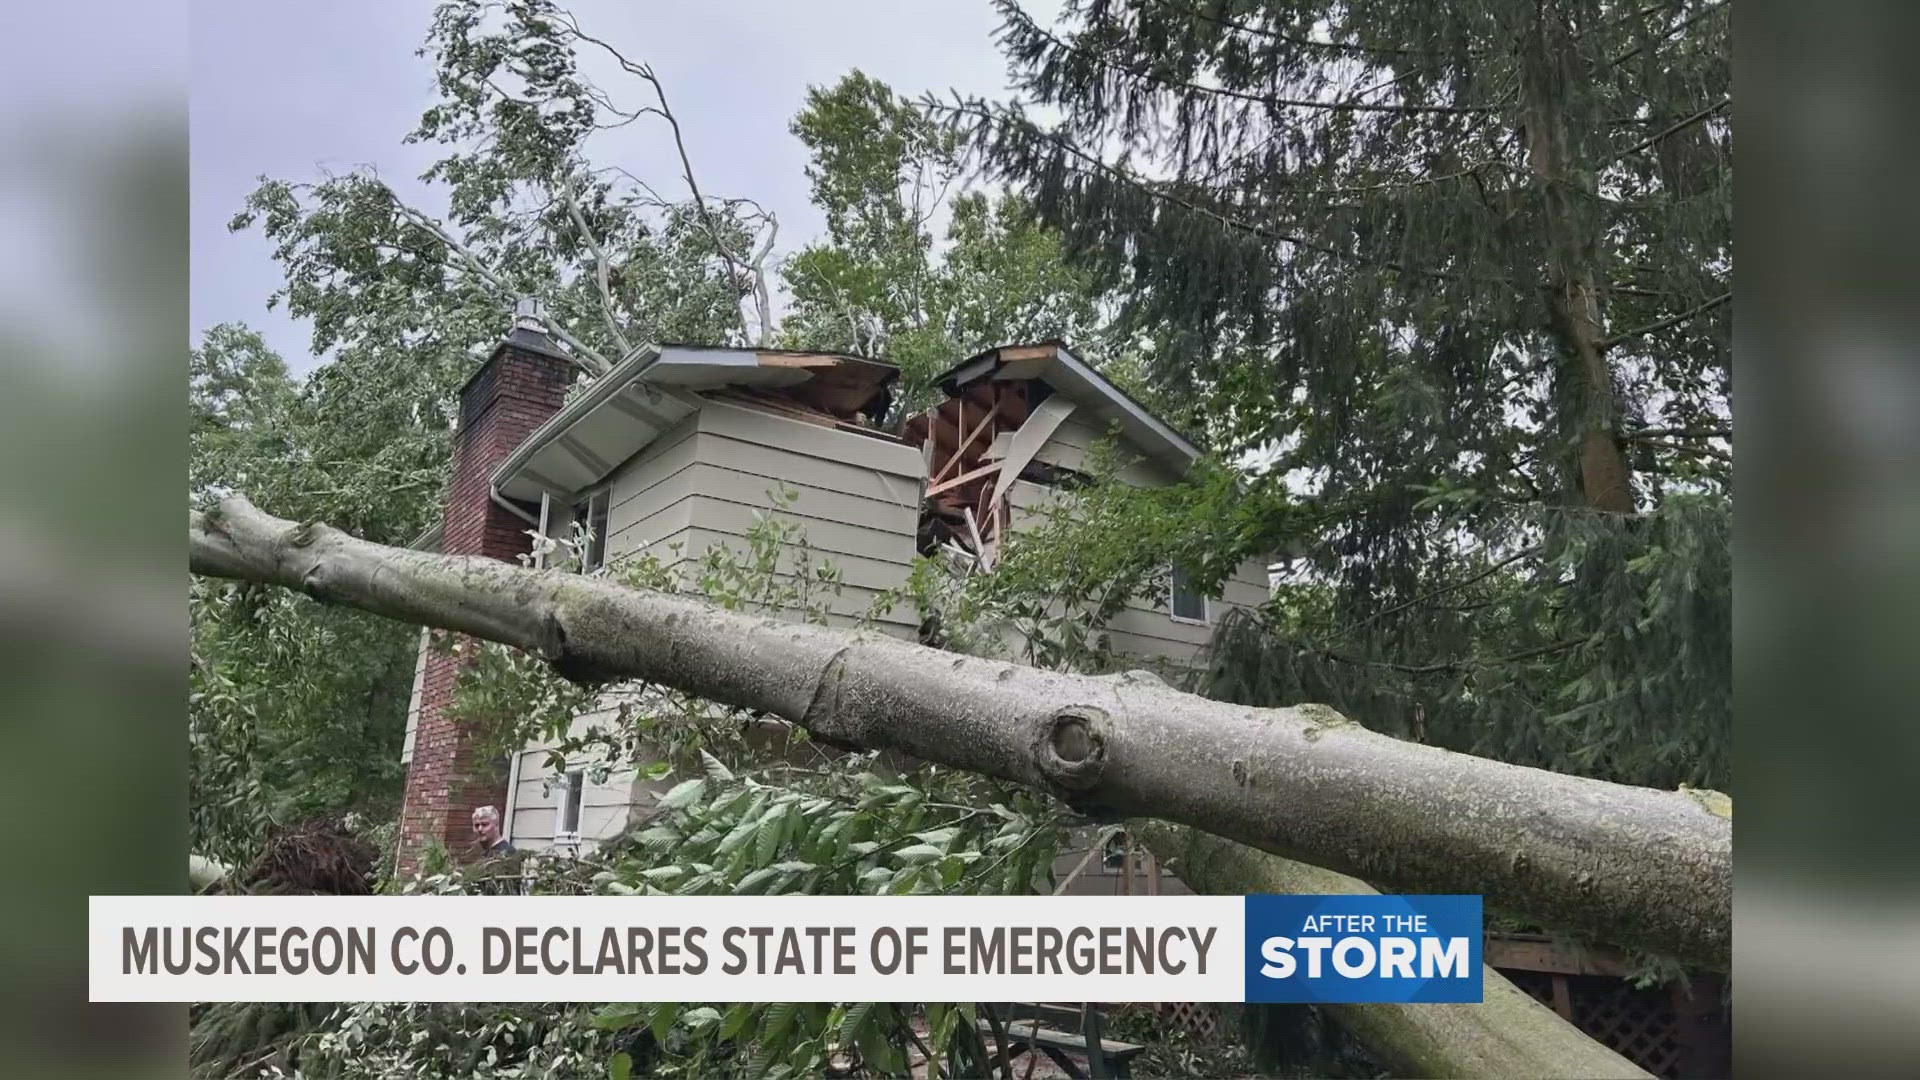 Muskegon County was one of the hardest-hit areas in the storms. In some areas wind speeds got up to 70 mph.